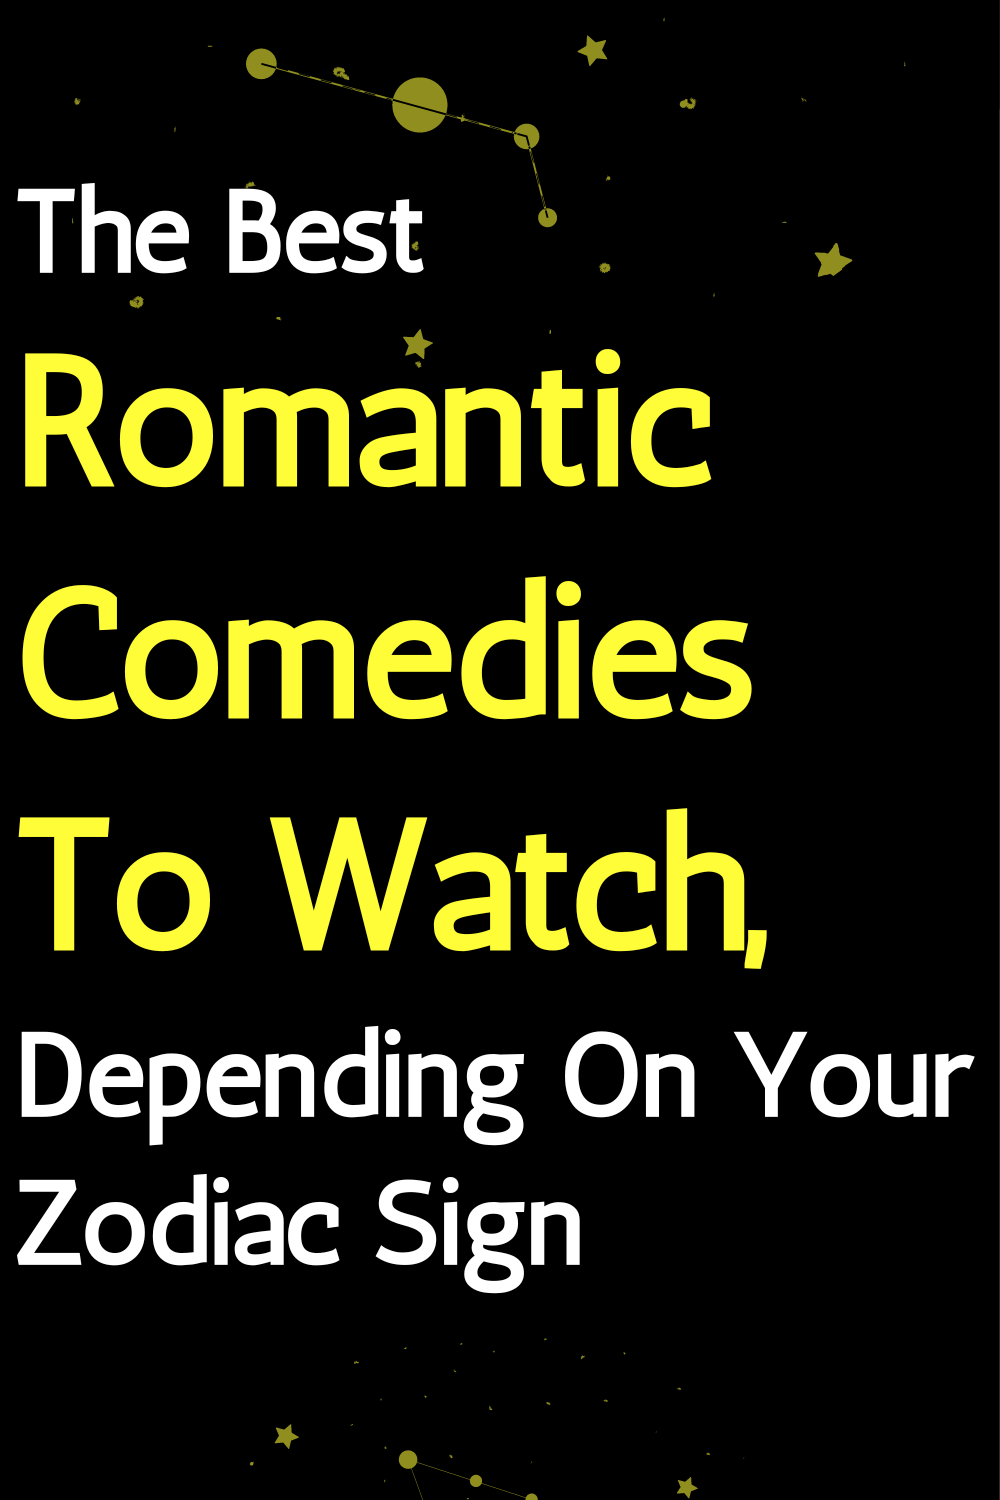 The Best Romantic Comedies To Watch, Depending On Your Zodiac Sign